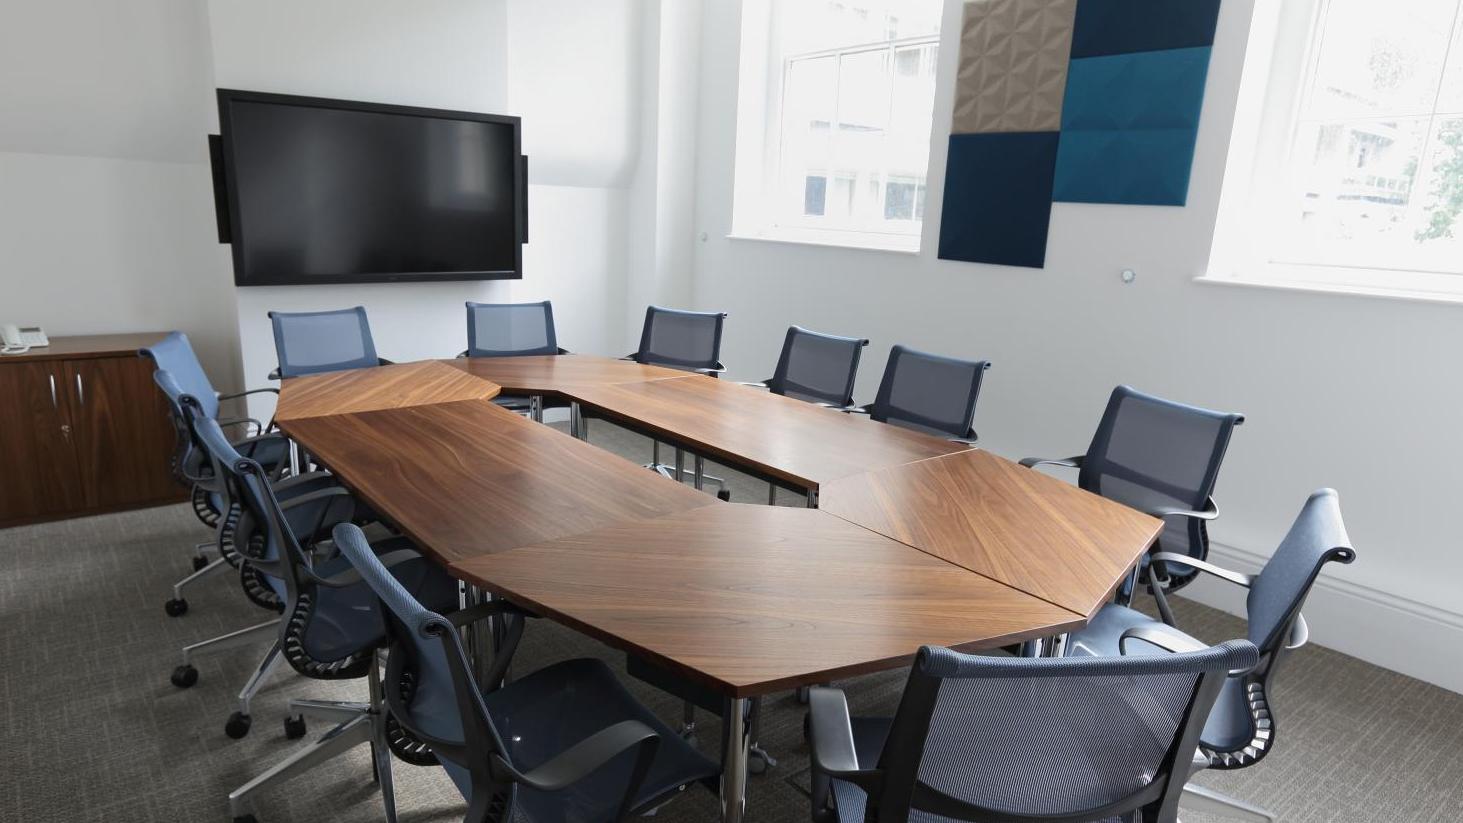 Find your Meeting Room in Charing Cross